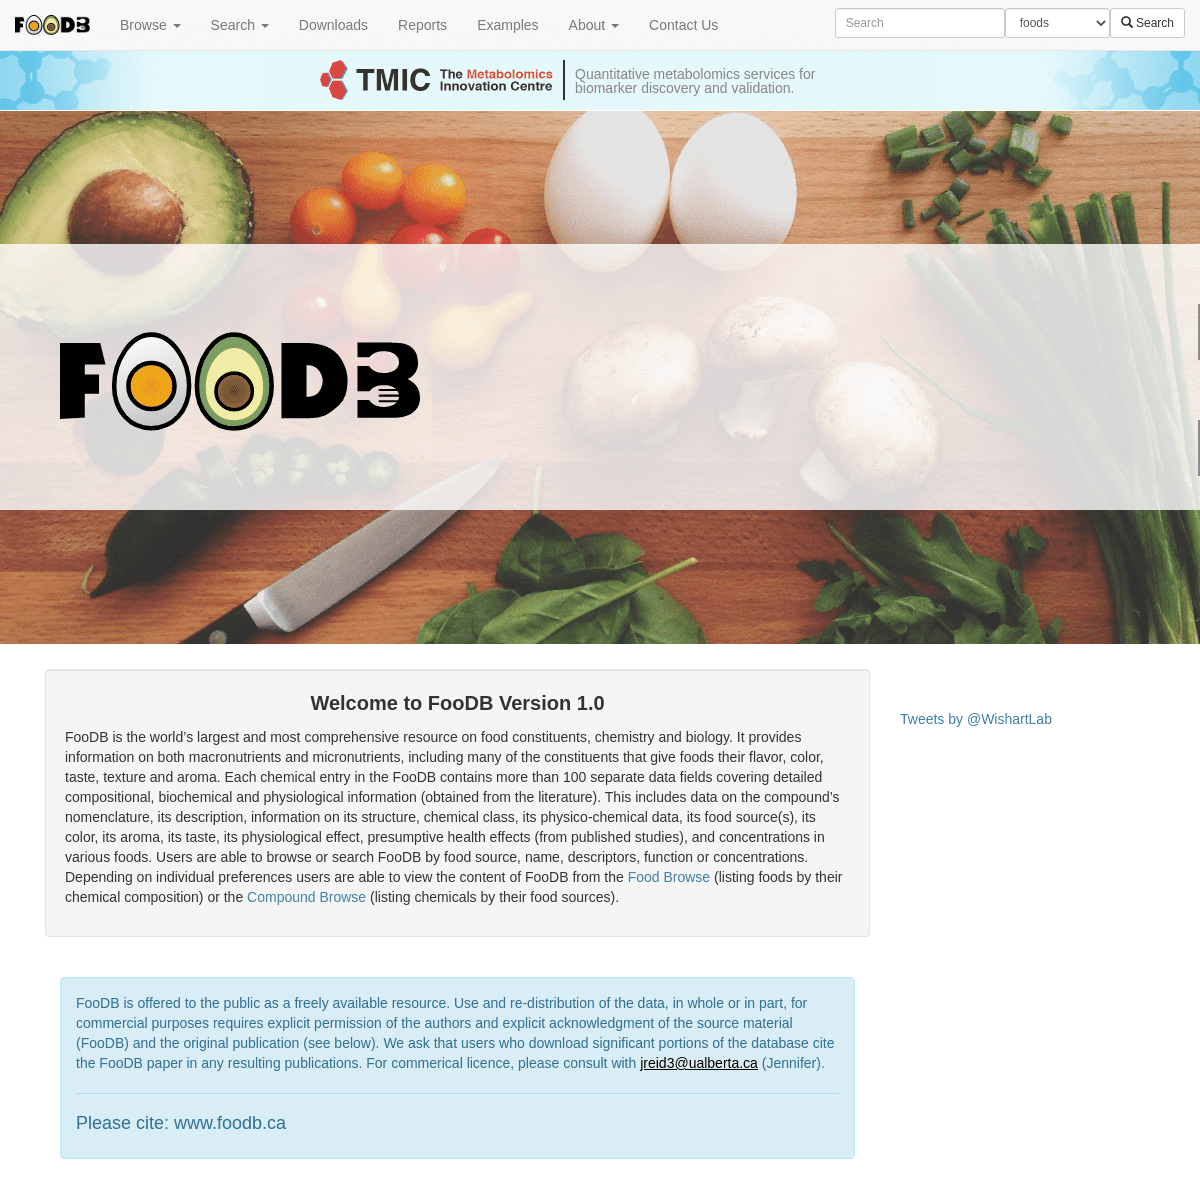 A complete backup of https://foodb.ca